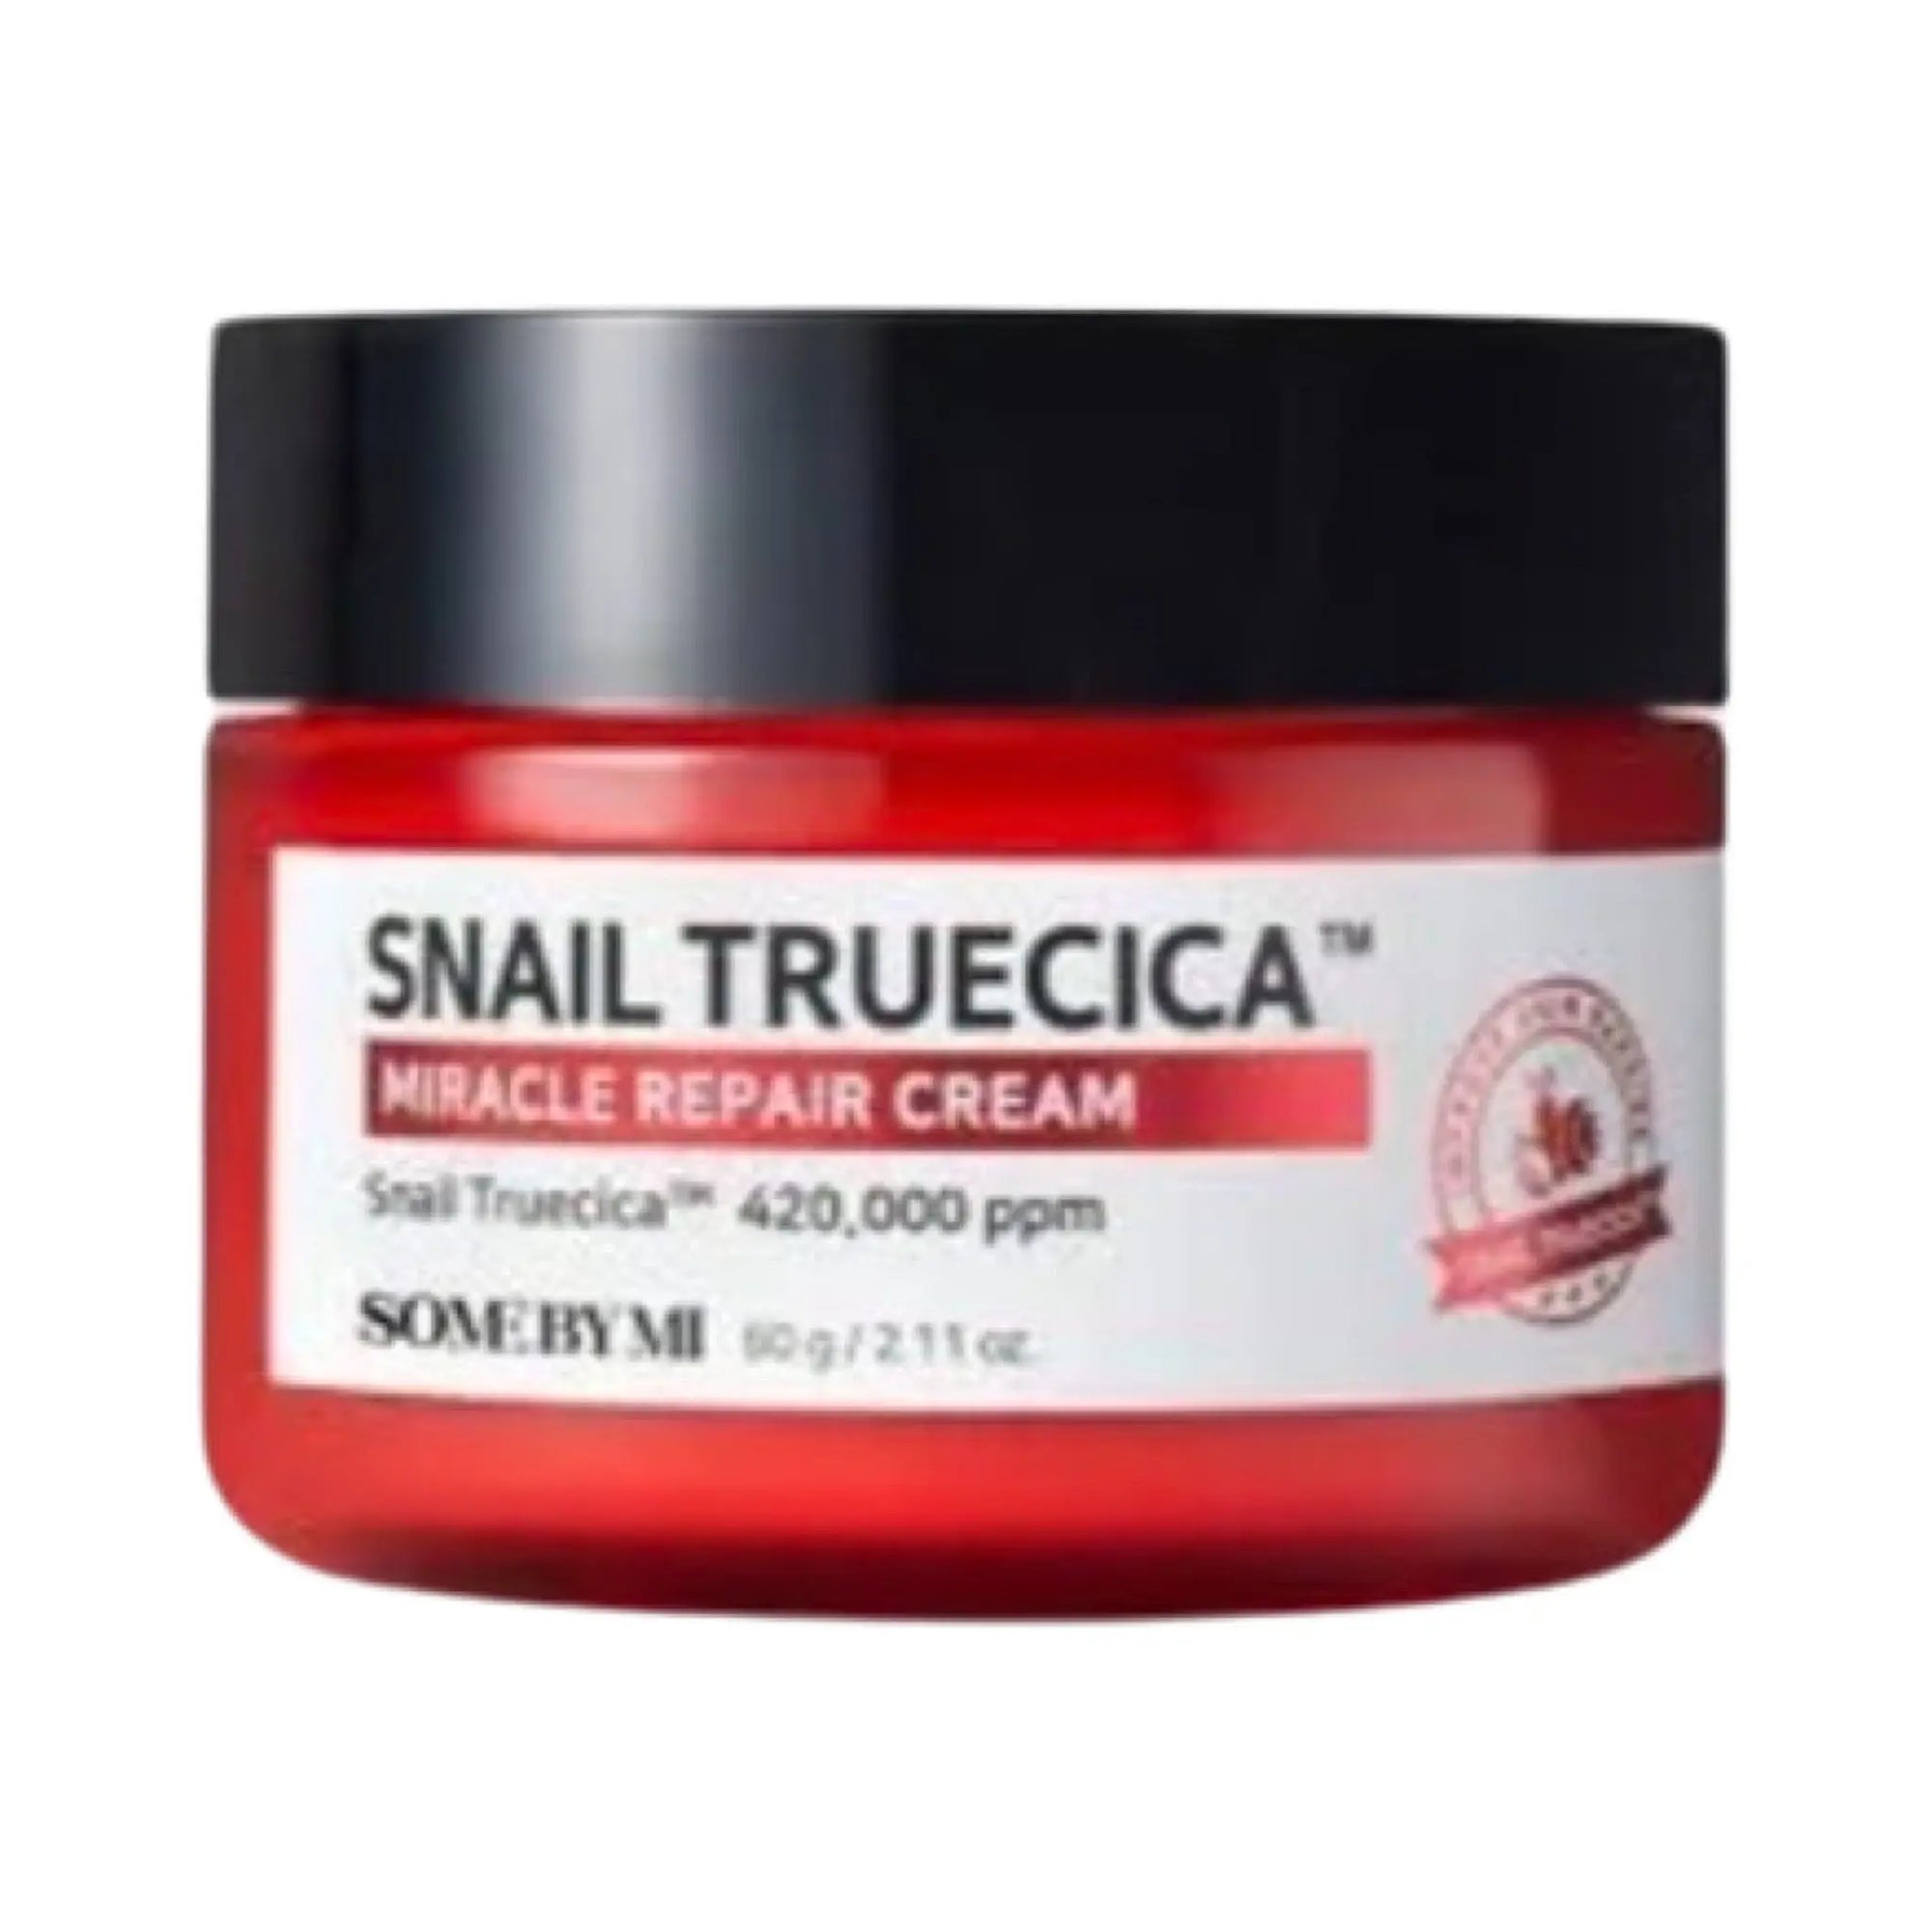 Some By Mi - Snail Truecica Miracle Repair Cream 60g Some By Mi